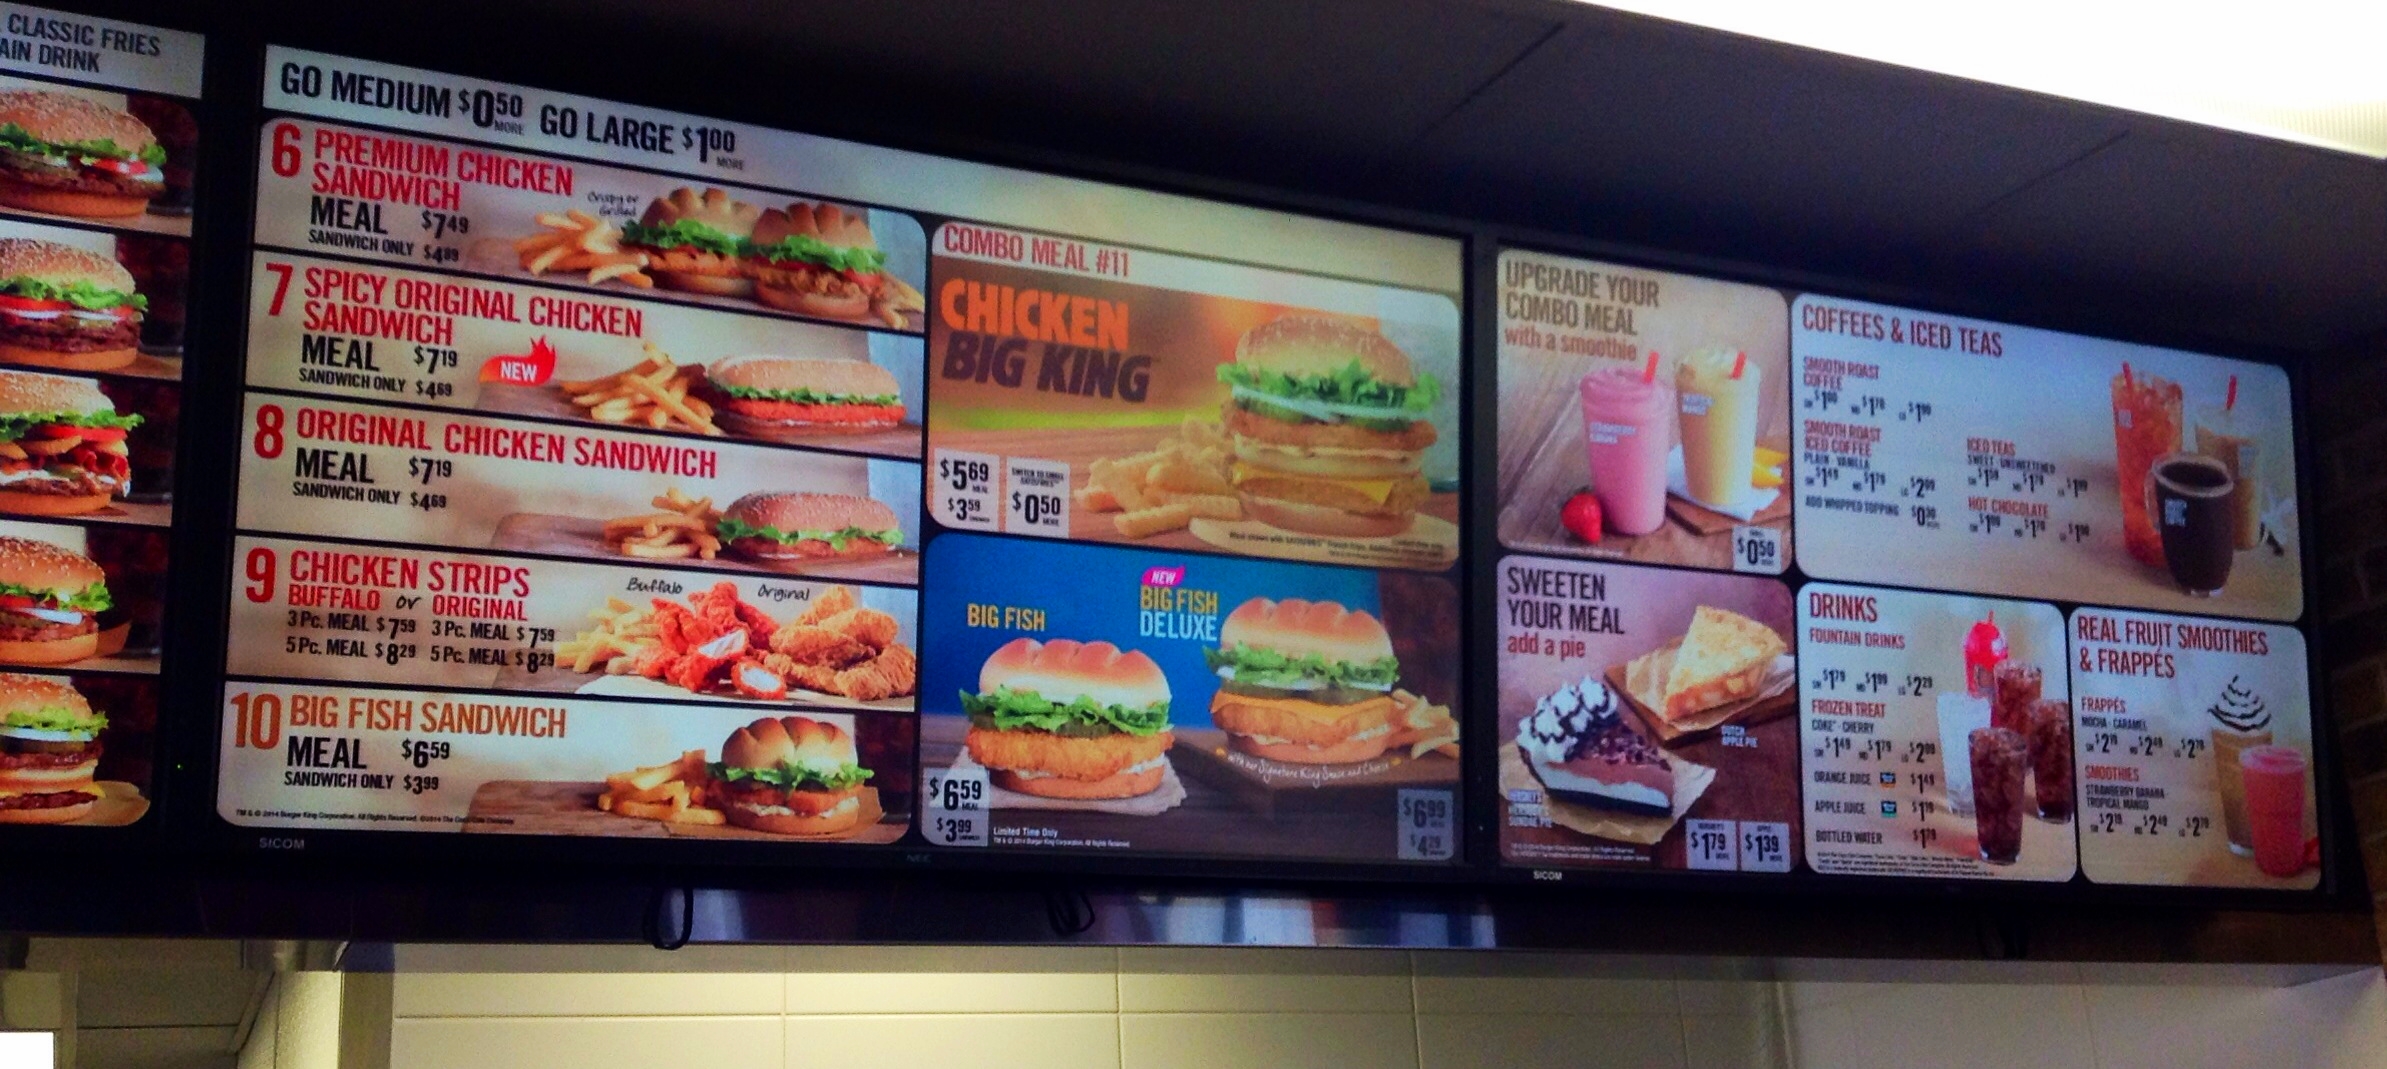 multiple menus are placed on the wall of the restaurant